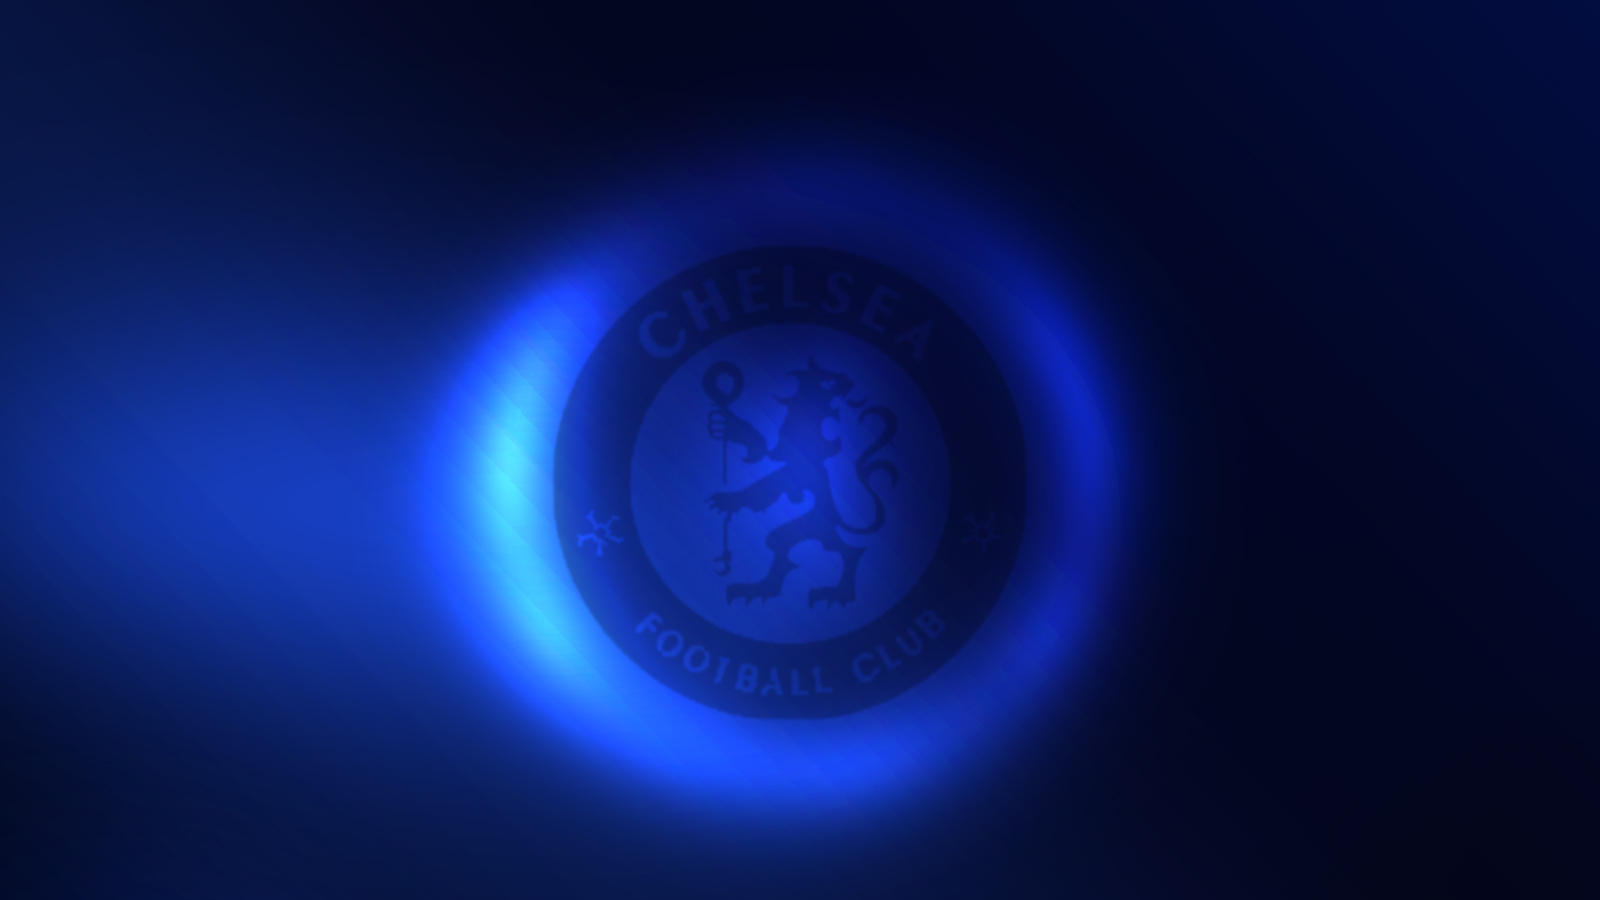 chelsea wallpaper logo free download is high definition wallpaper you